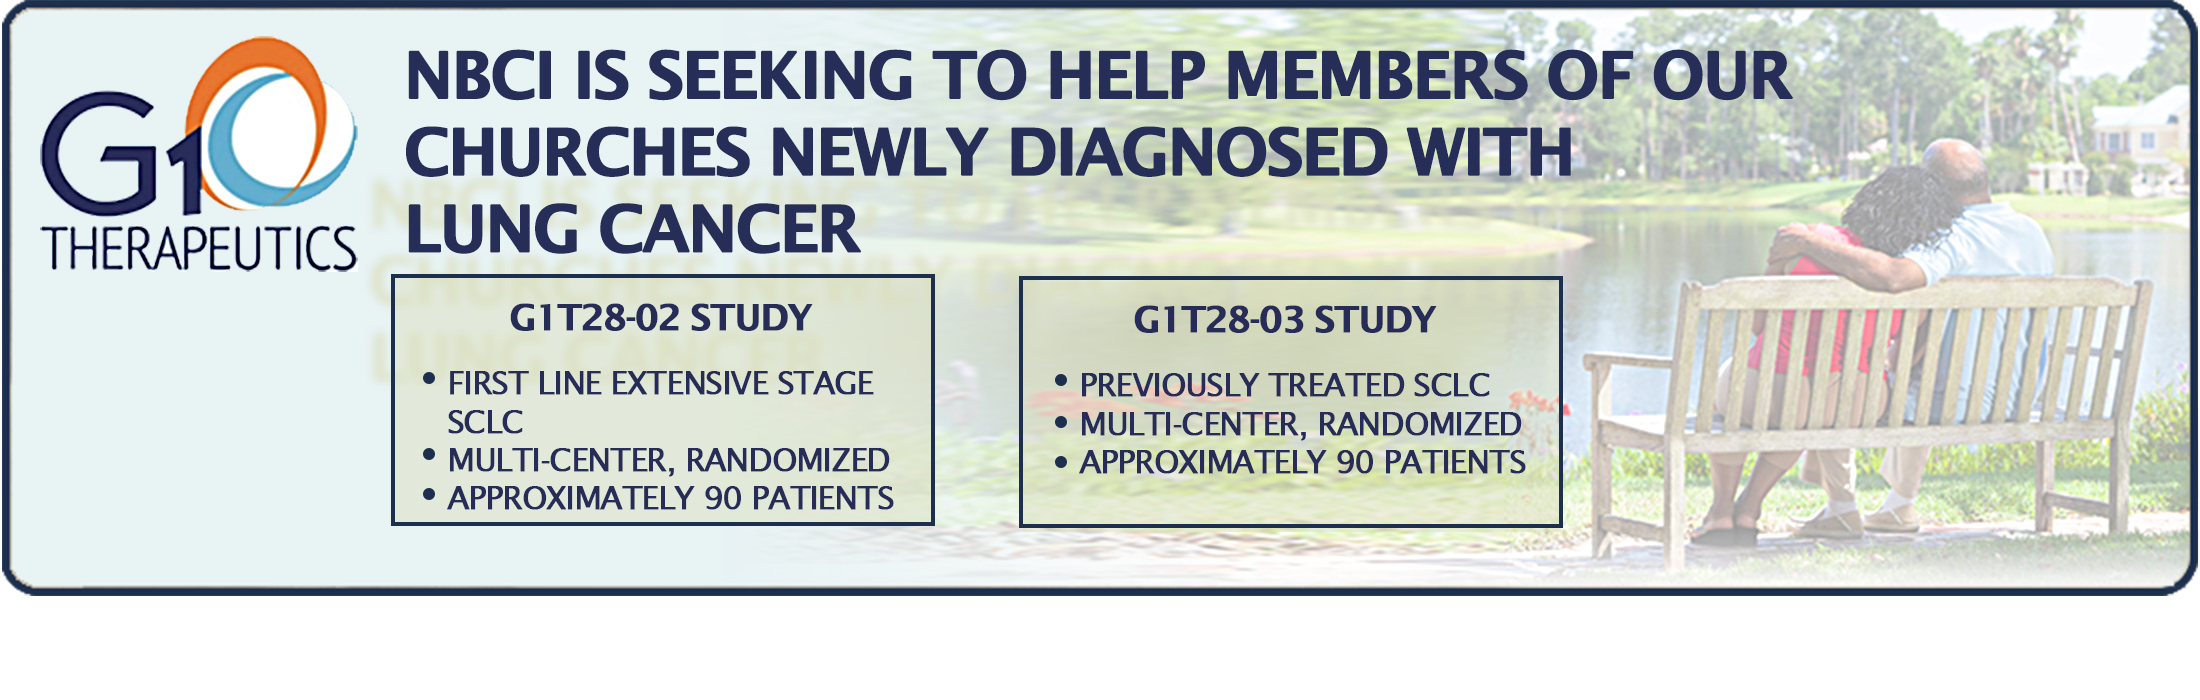 NBCI Wants to Help Our Church Members Newly Diagnosed With Lung Cancer